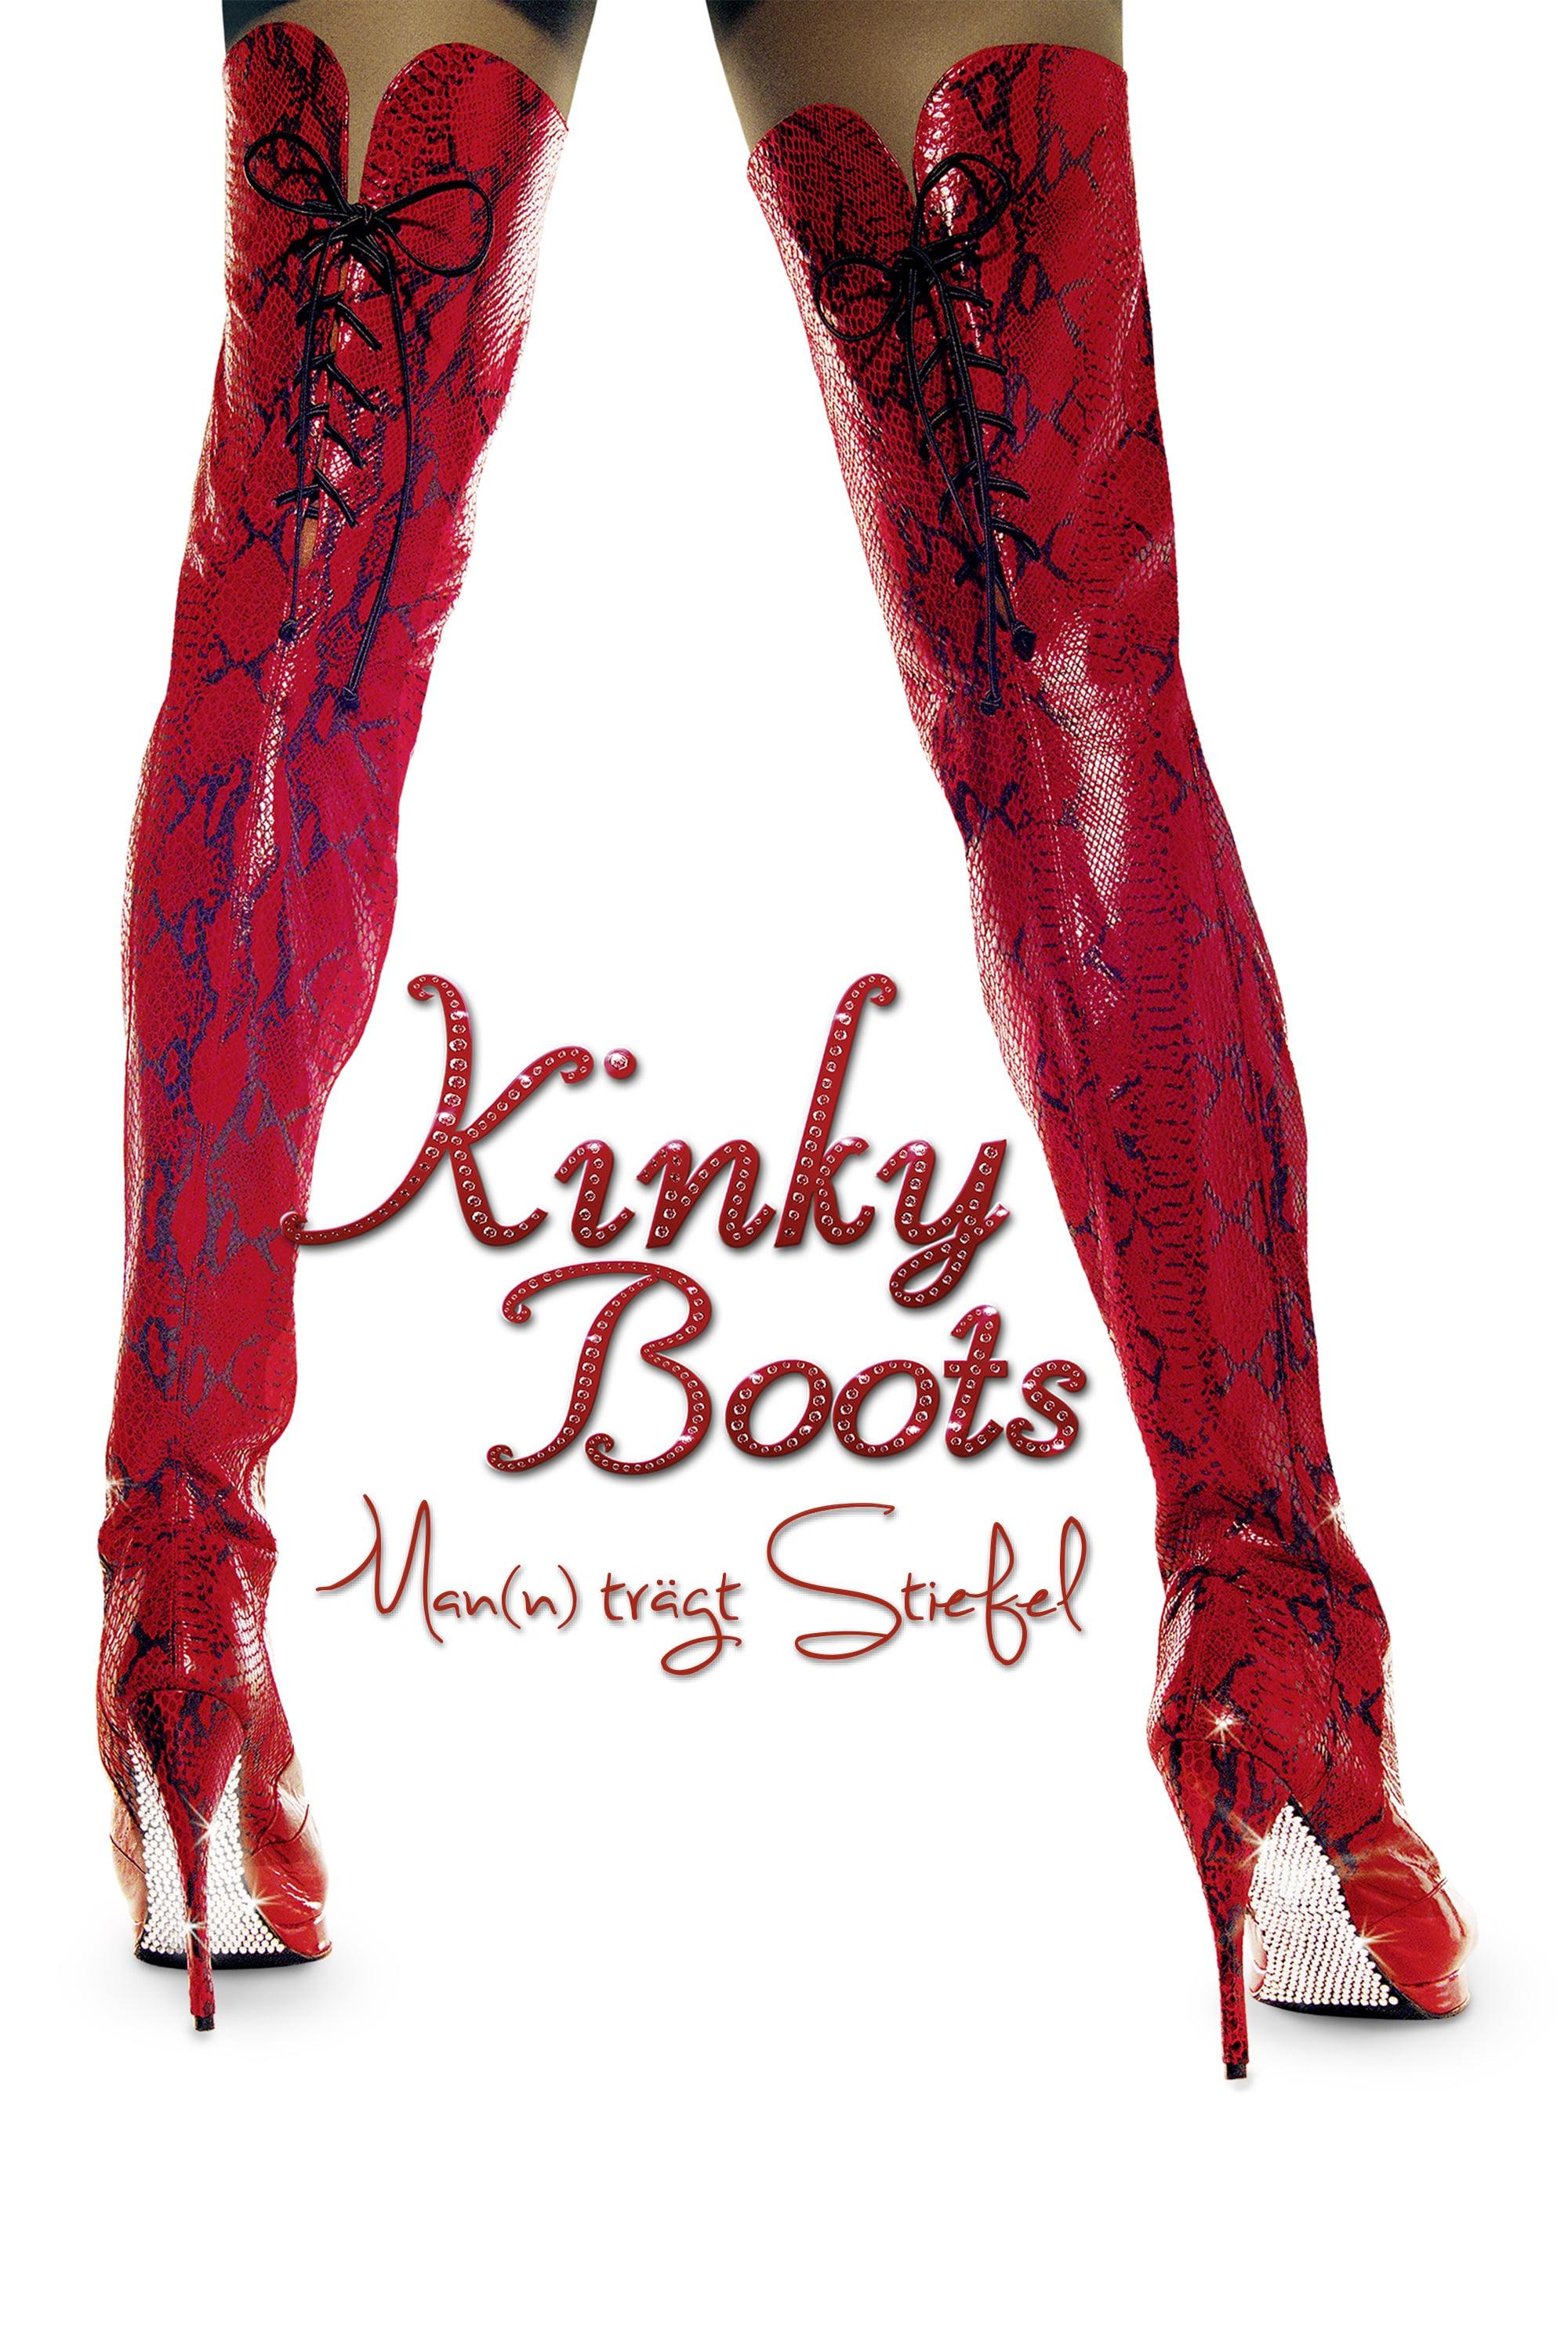 Kinky Boots - Man(n) trägt Stiefel poster